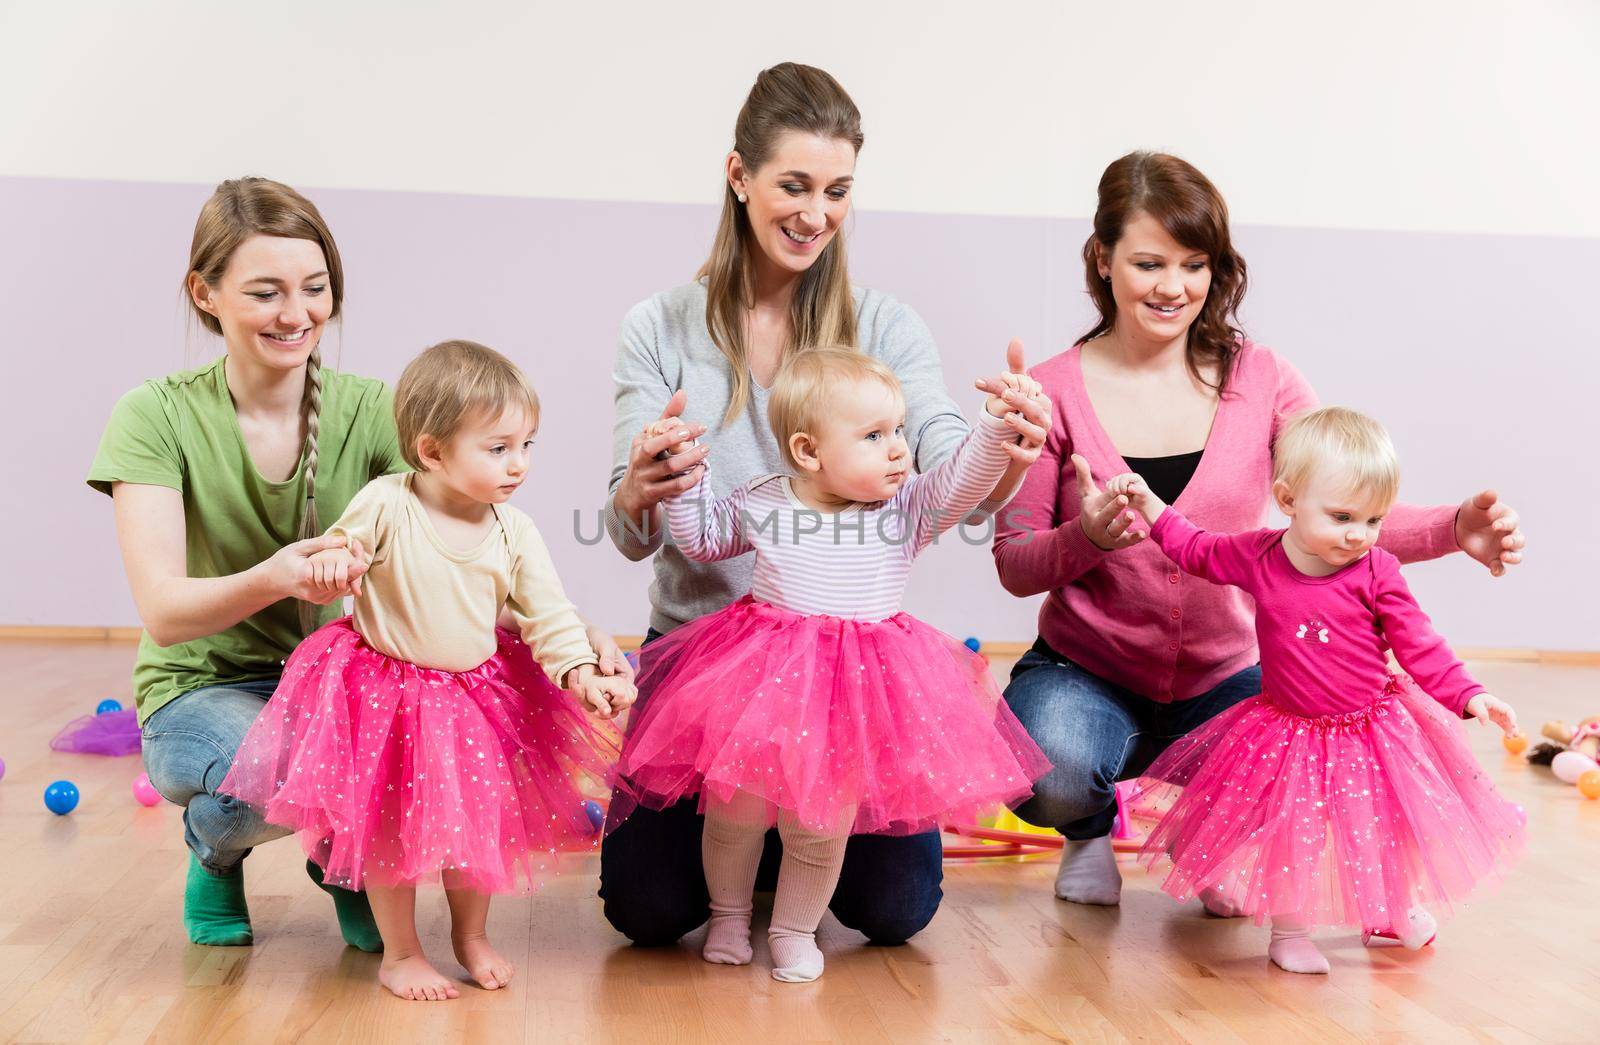 Three baby girls in pink skirts learning to walk with help of their mothers